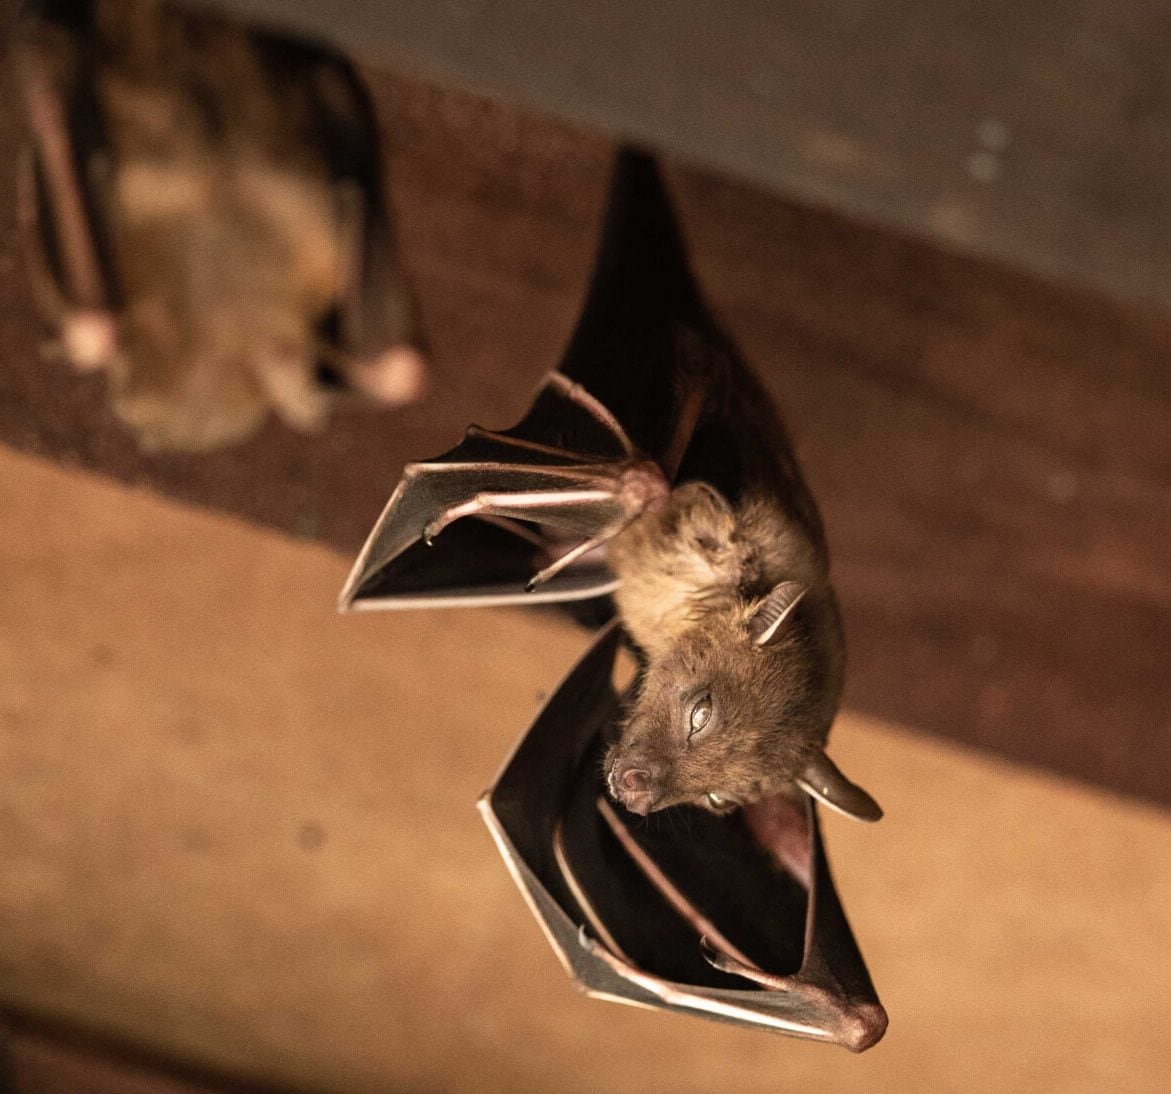 Bat removal services from wildlife removal experts in Wyoming, Delaware